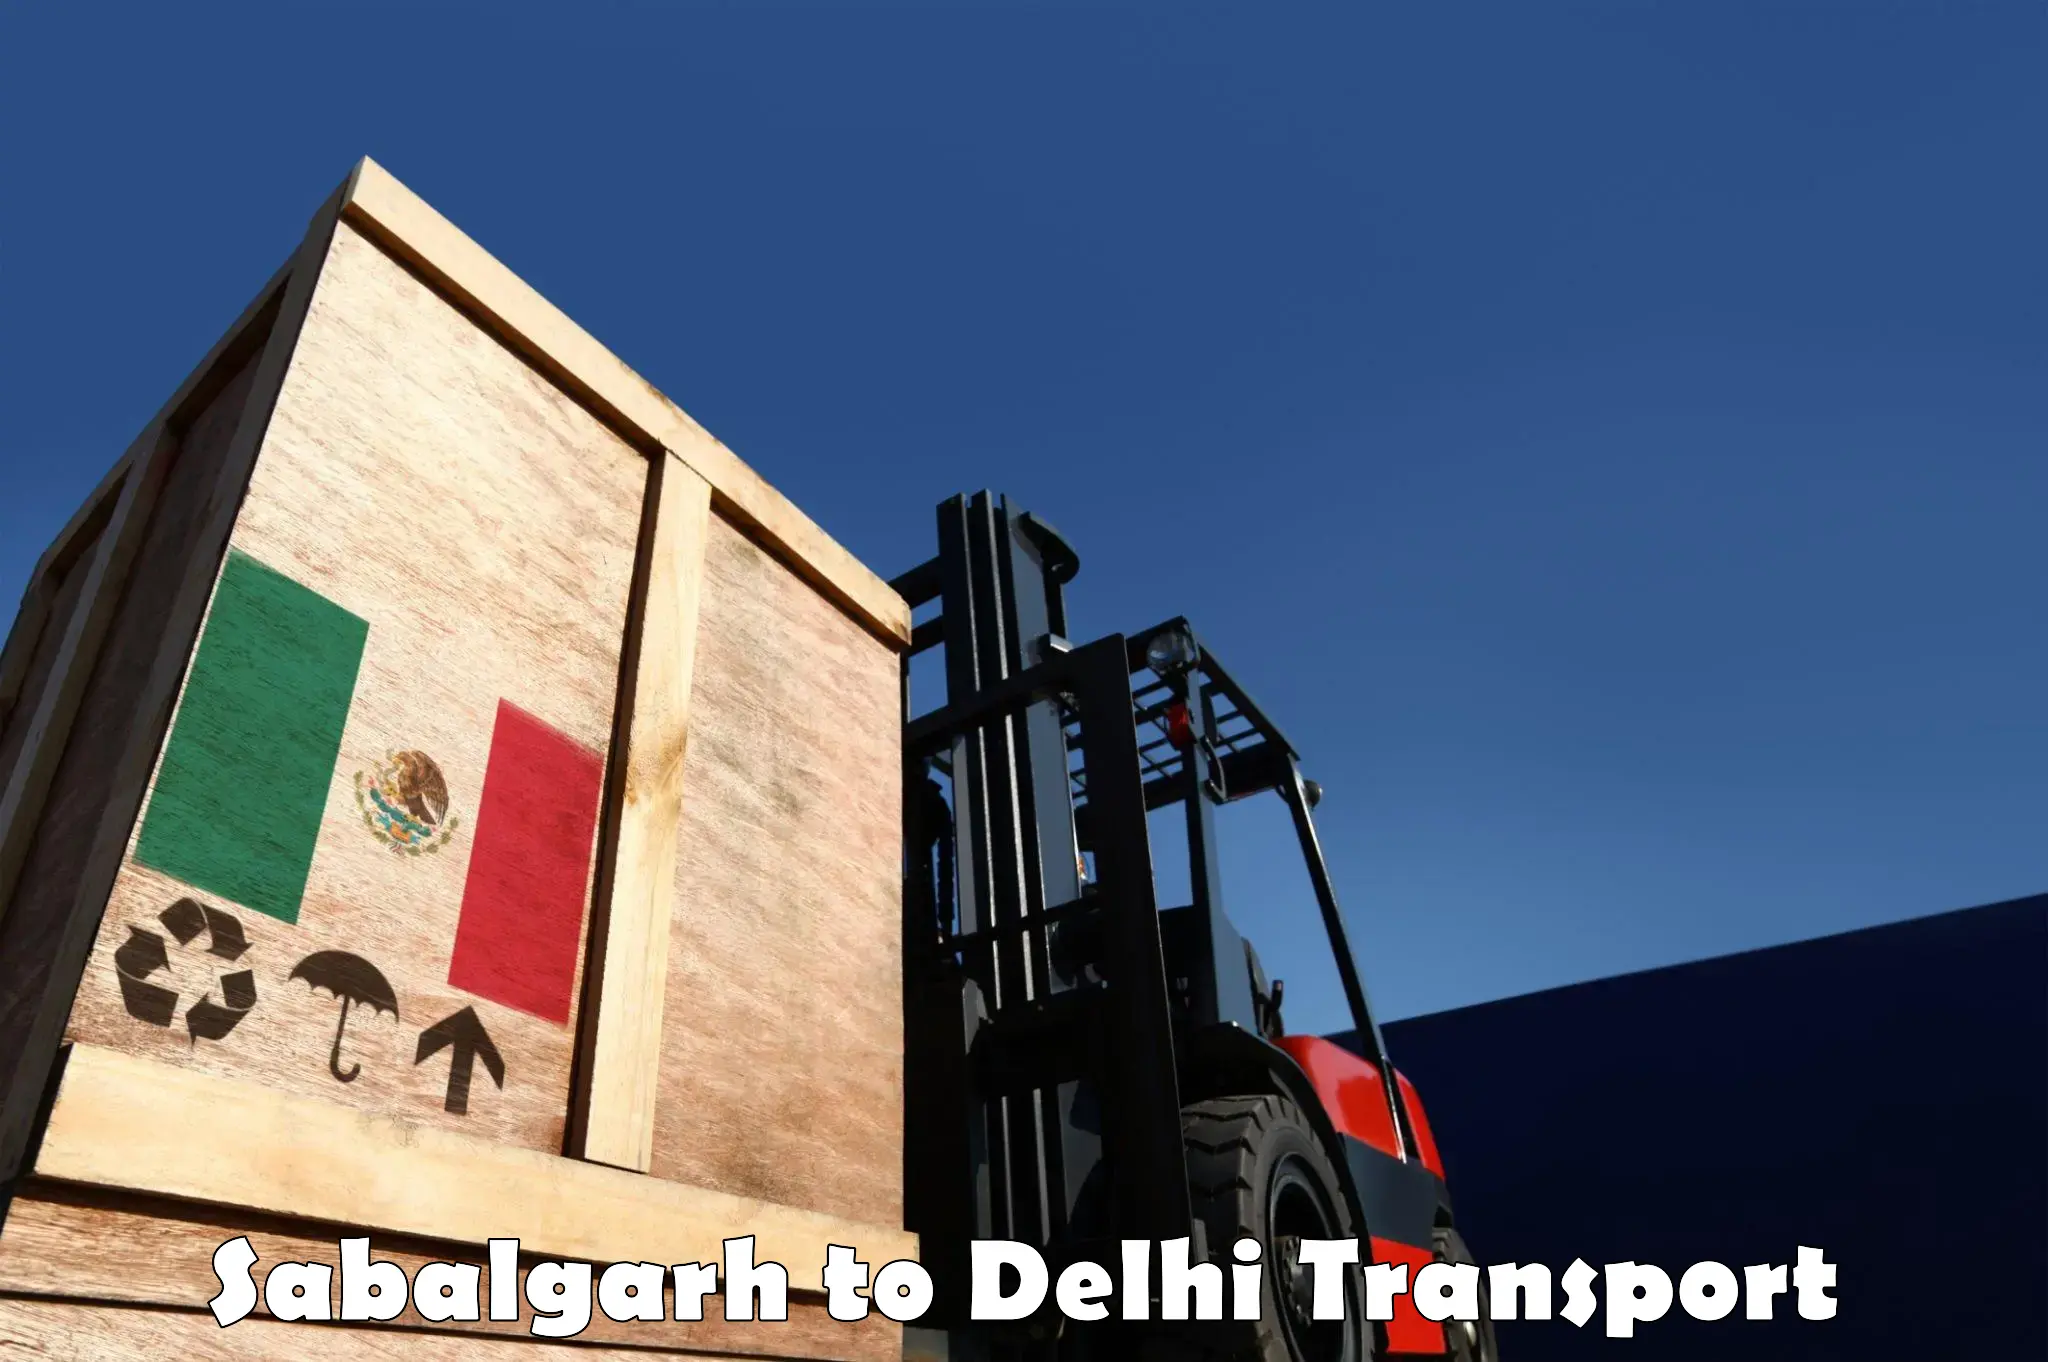 Express transport services in Sabalgarh to NCR